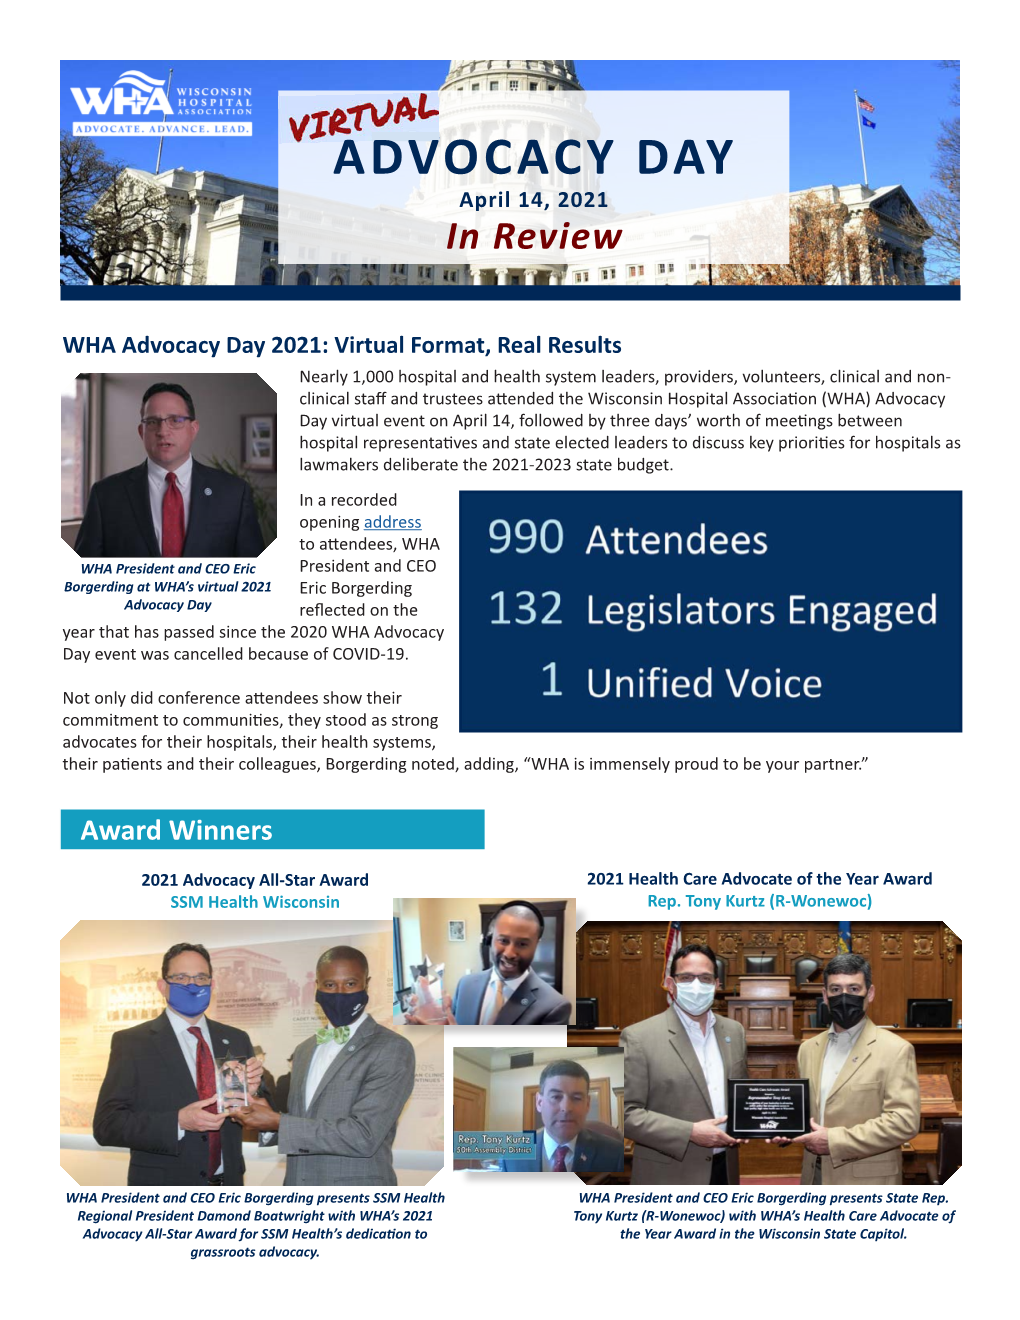 ADVOCACY DAY April 14, 2021 in Review